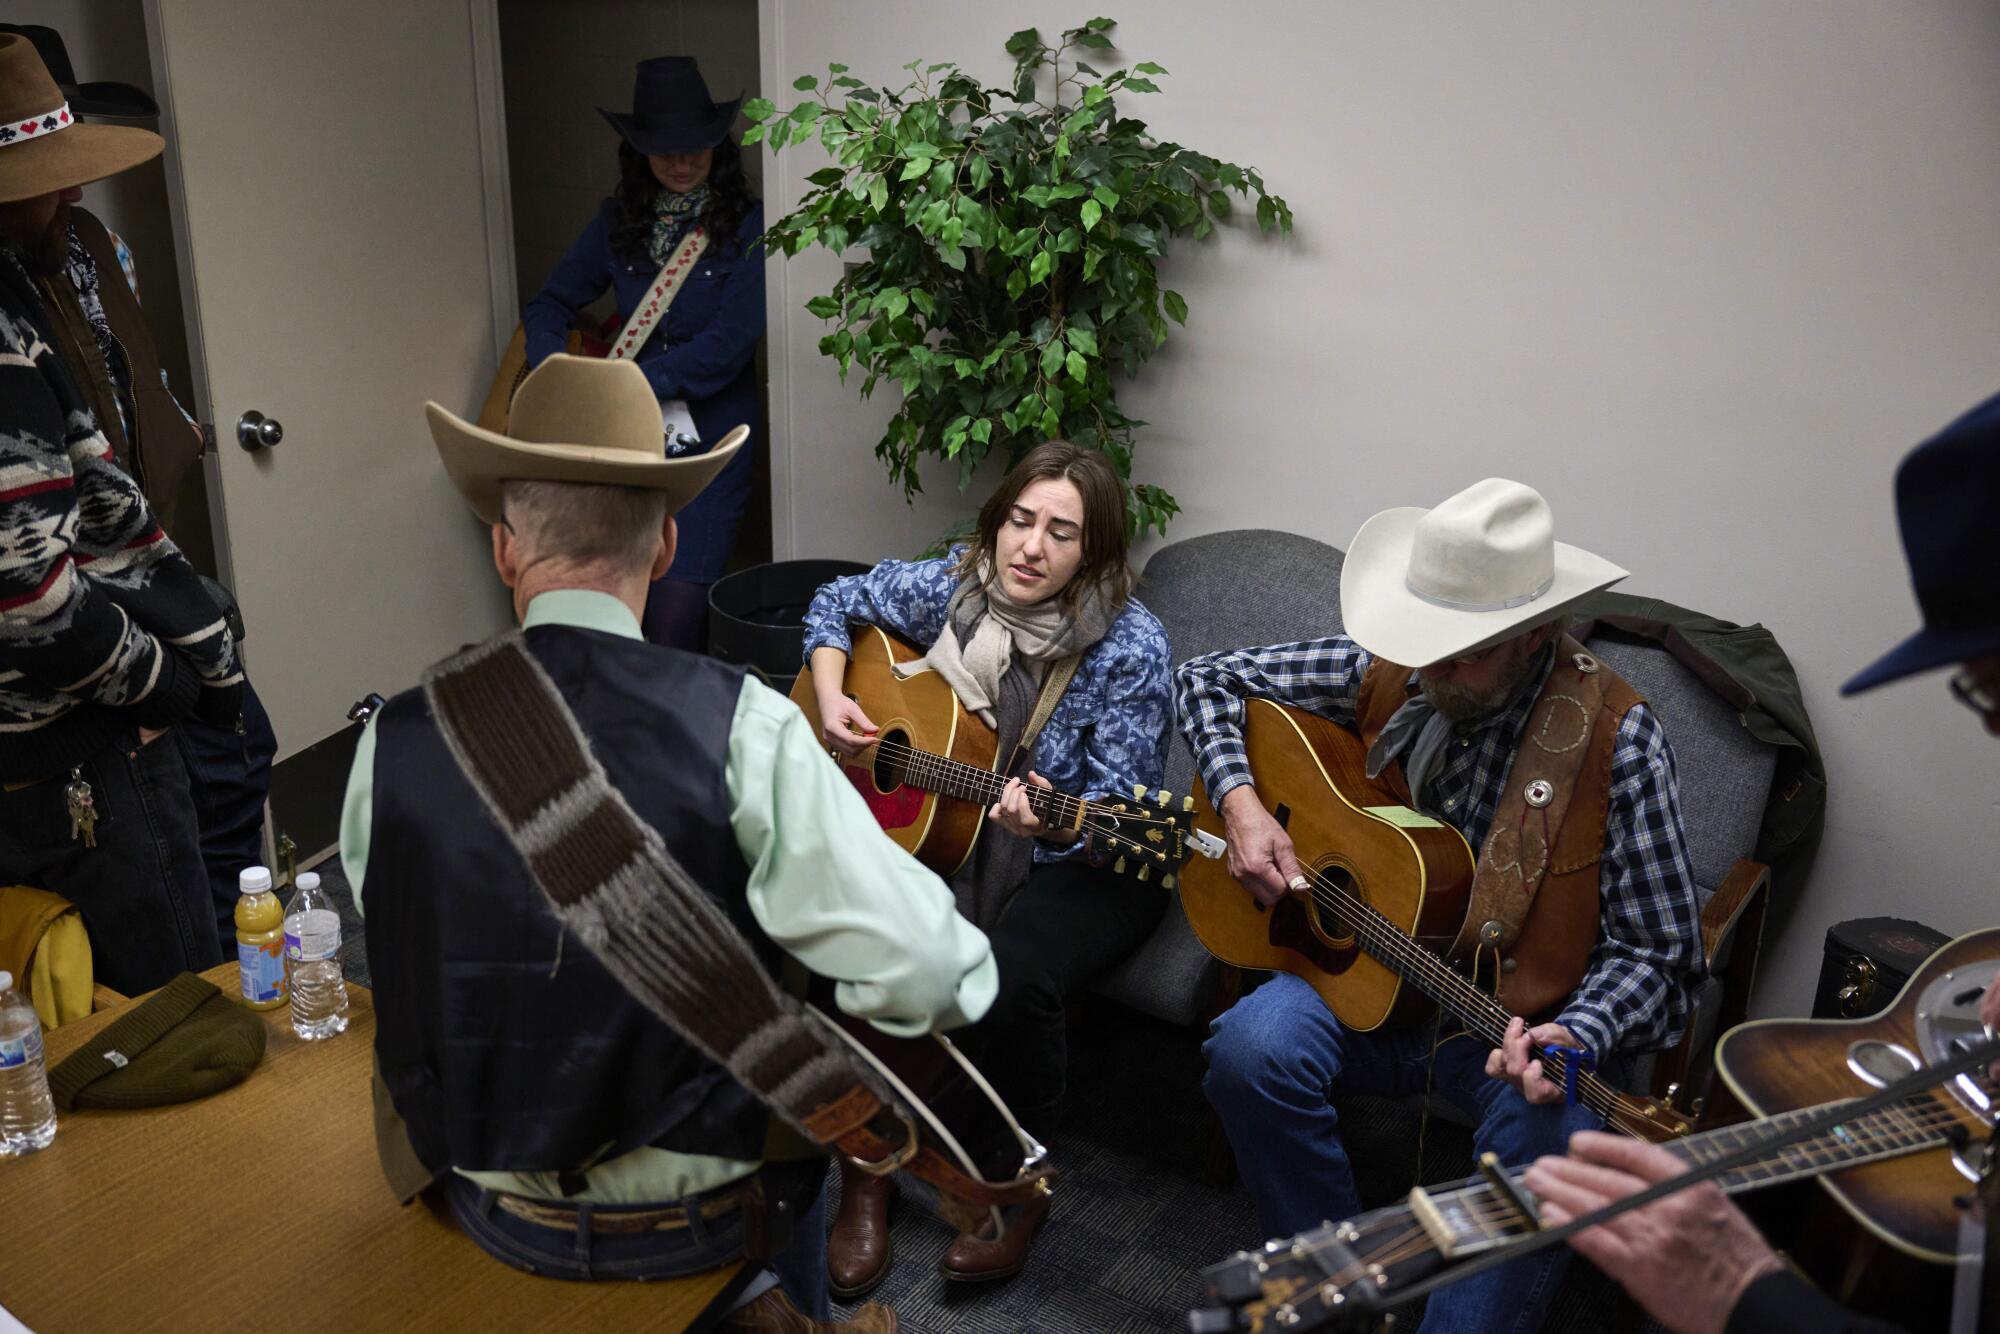 Margo Cilker, center, sings with other performers backstage at the National Cowboy Poetry Gathering.